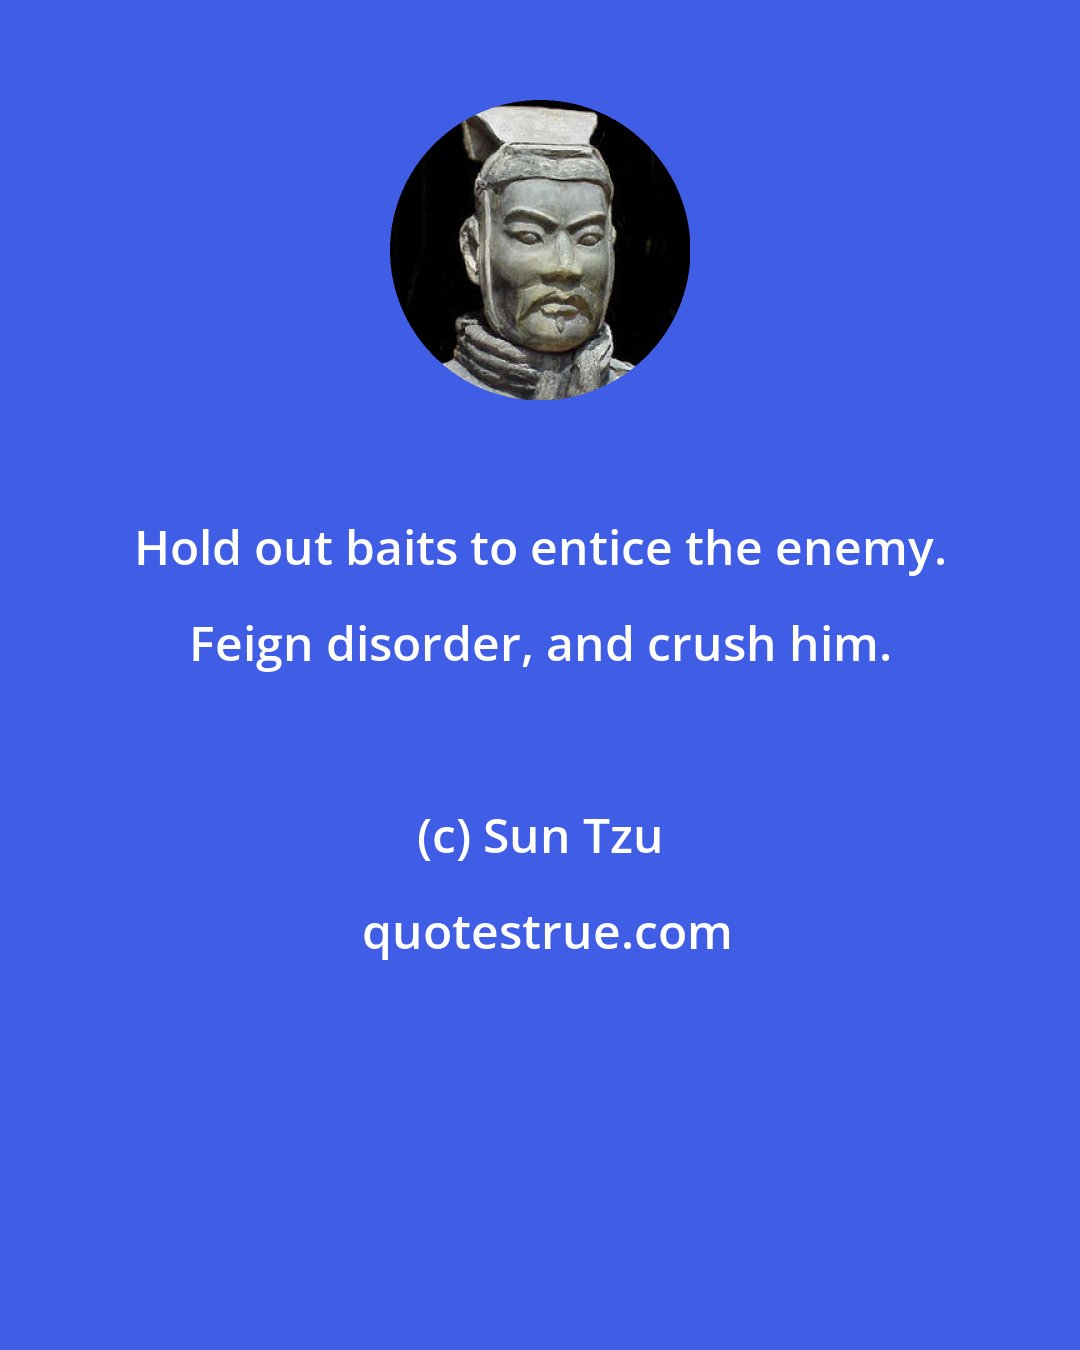 Sun Tzu: Hold out baits to entice the enemy. Feign disorder, and crush him.